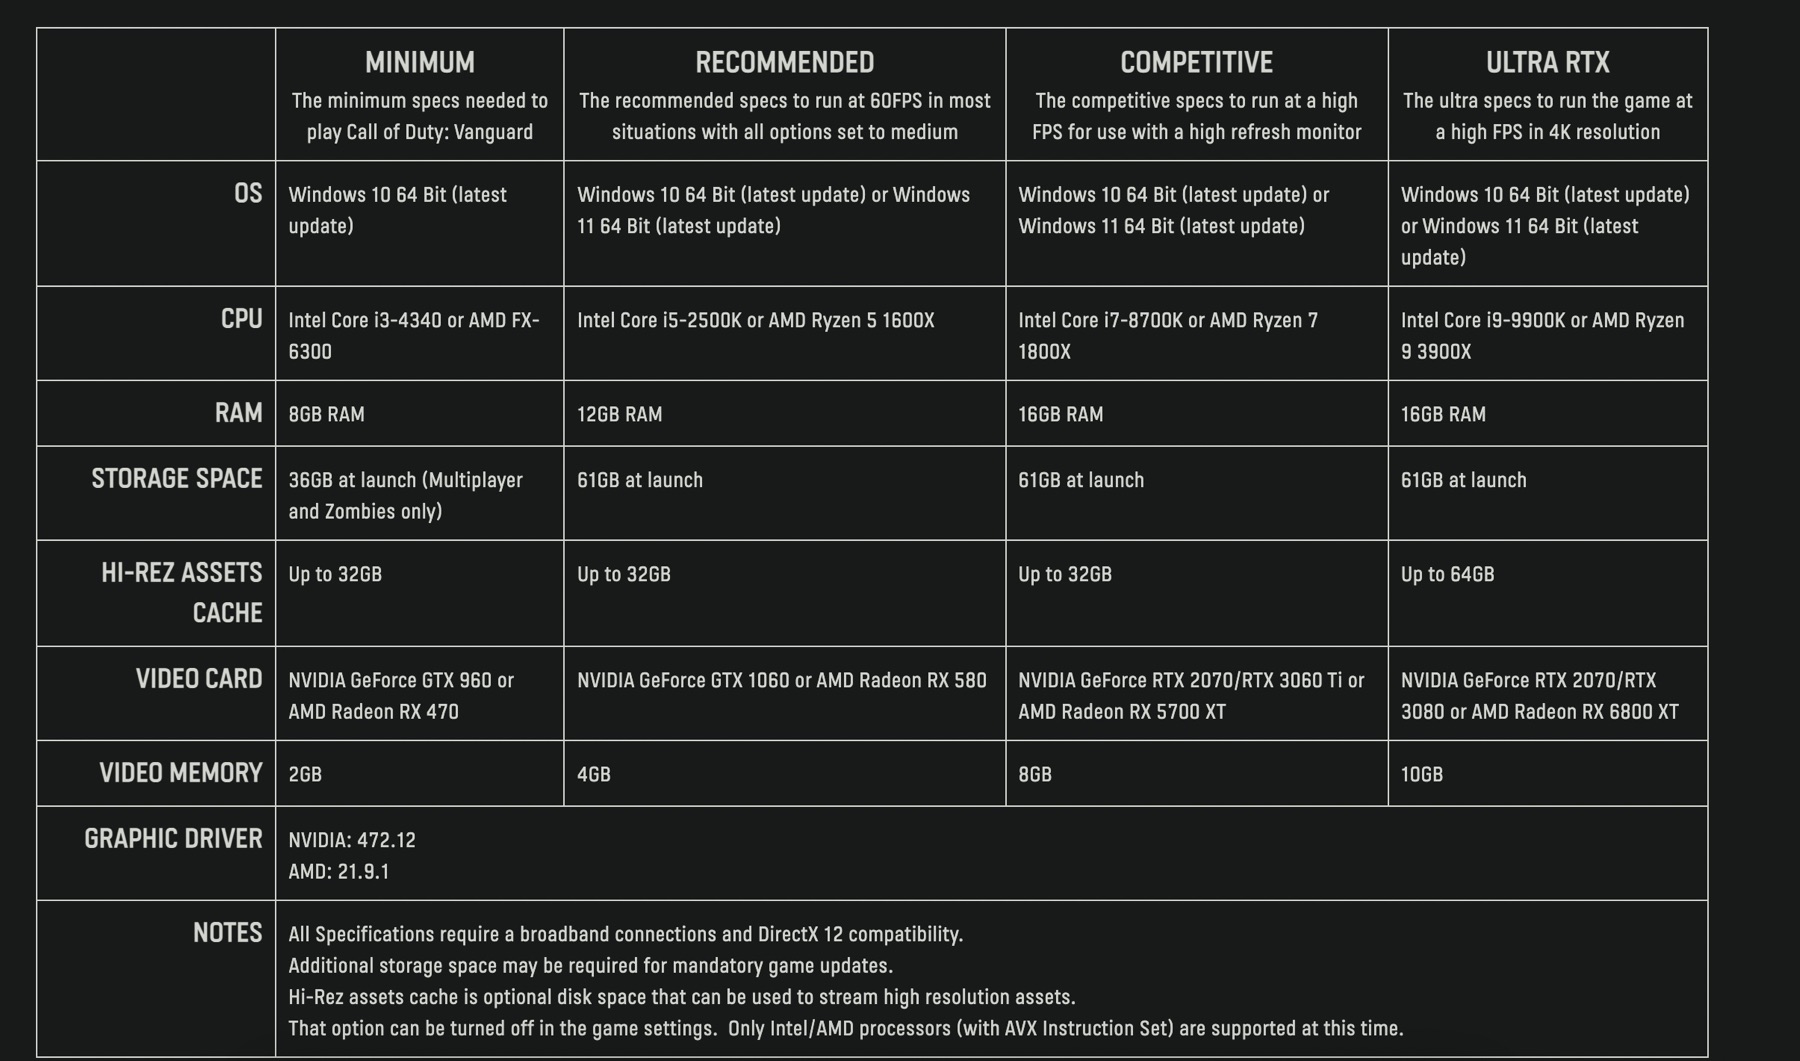 Call of Duty: Vanguard PC specifications